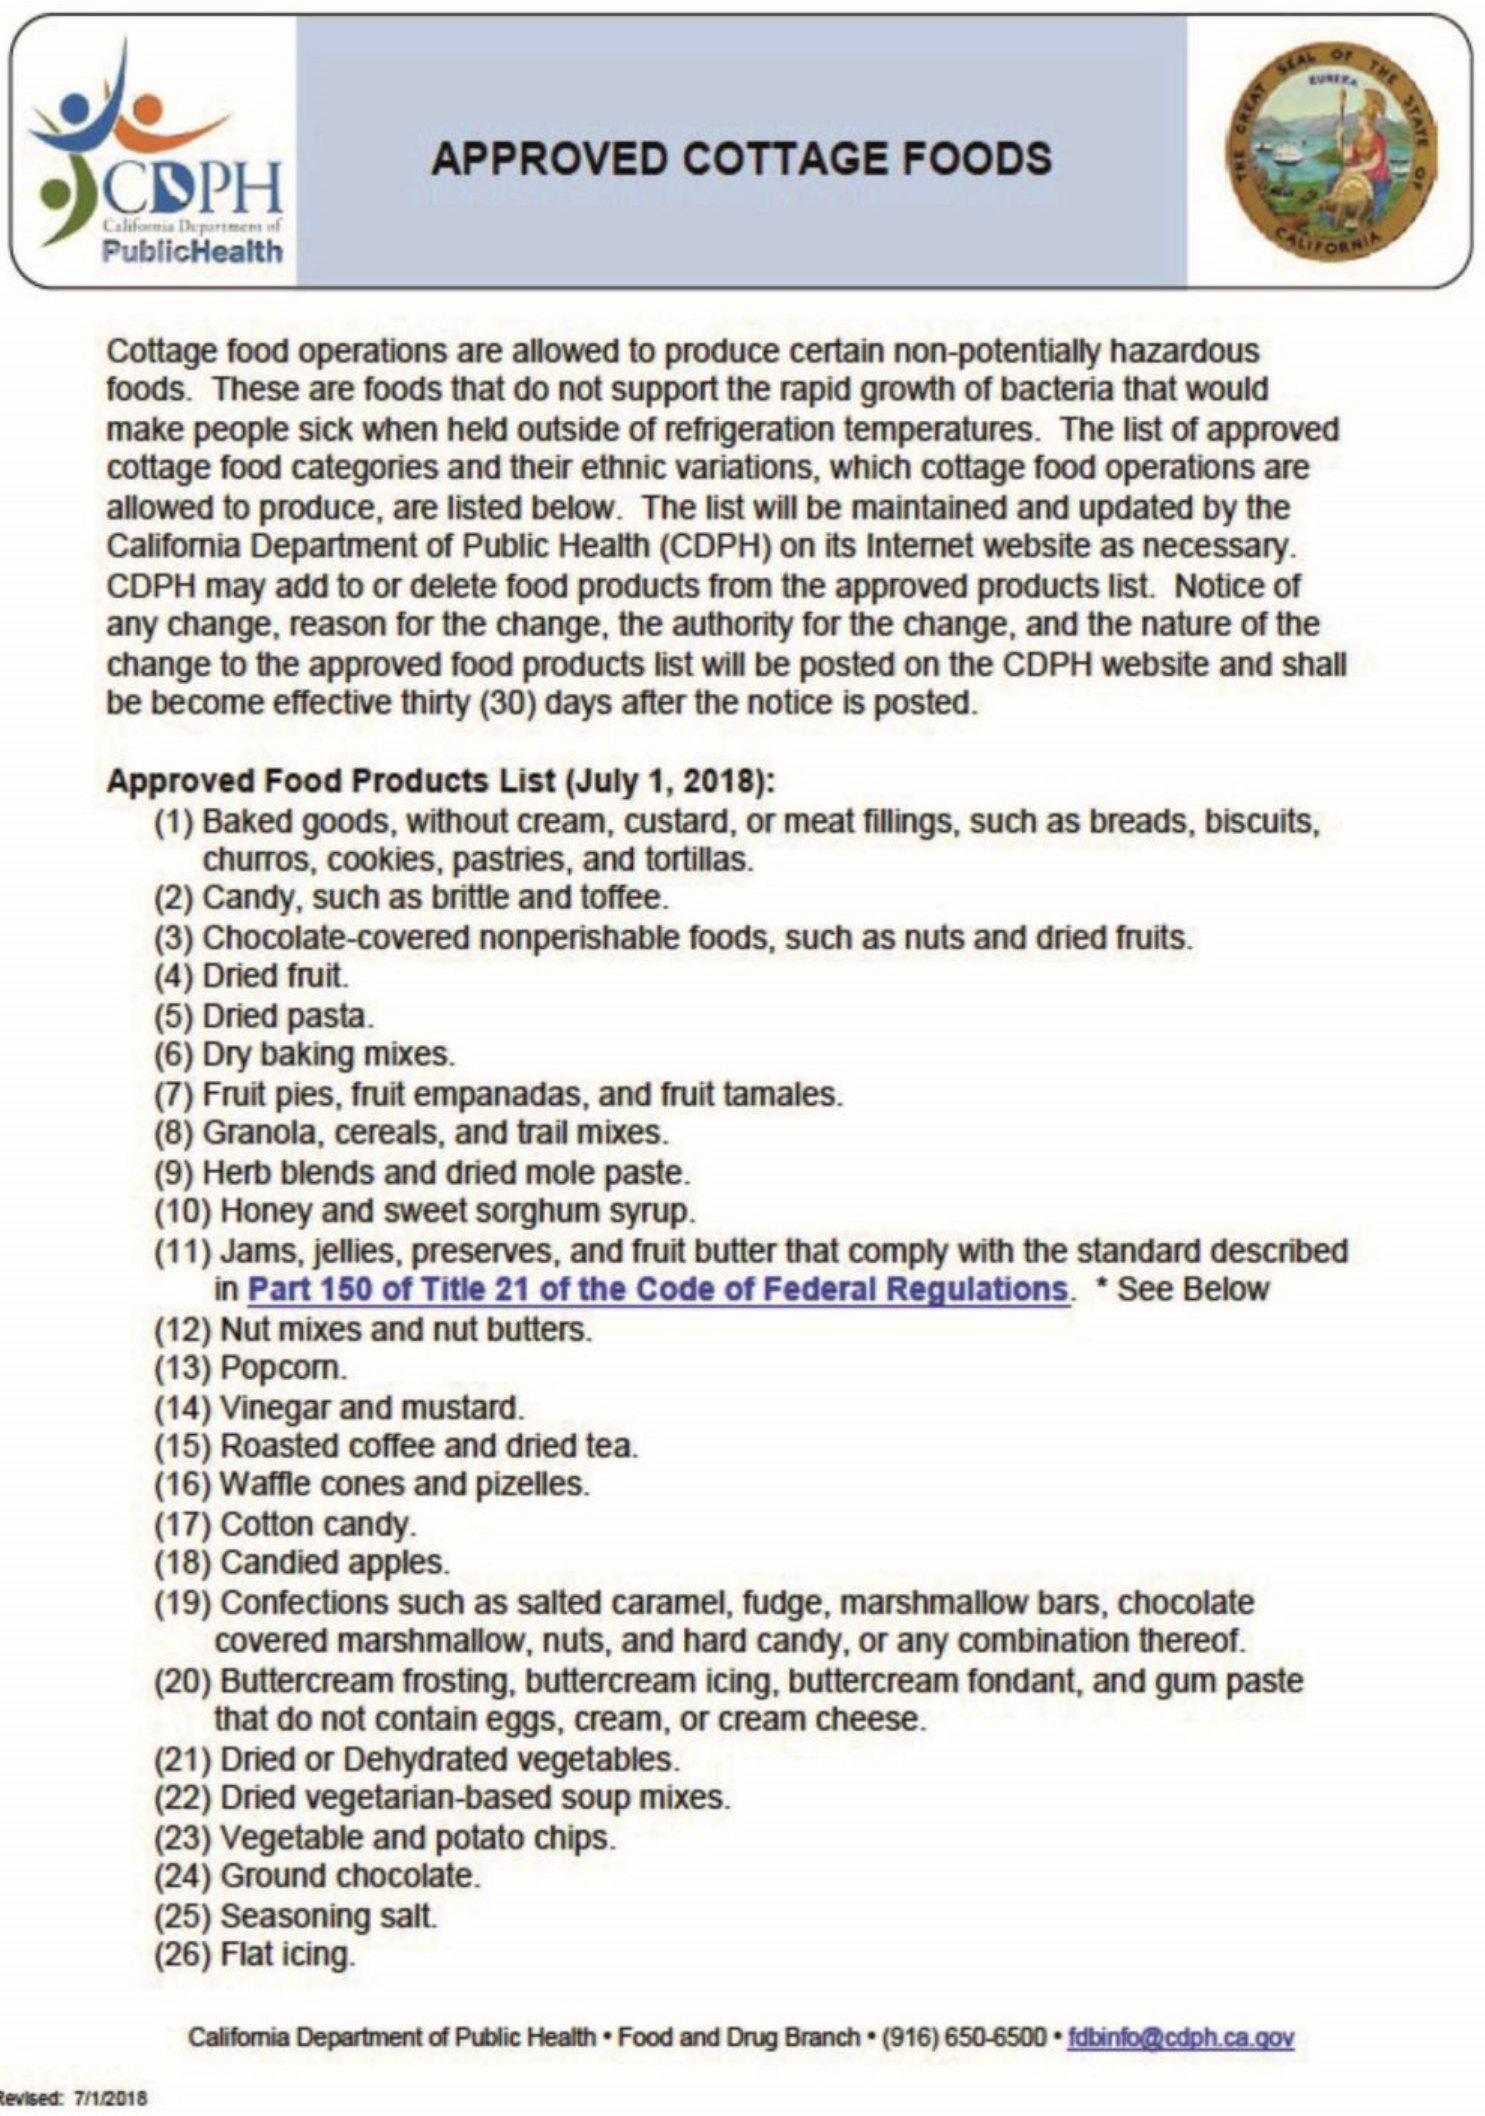 An image shows the first page of a list of cottage foods which qualify under “Cottage Food Law” issued by Department of Public Health in California.